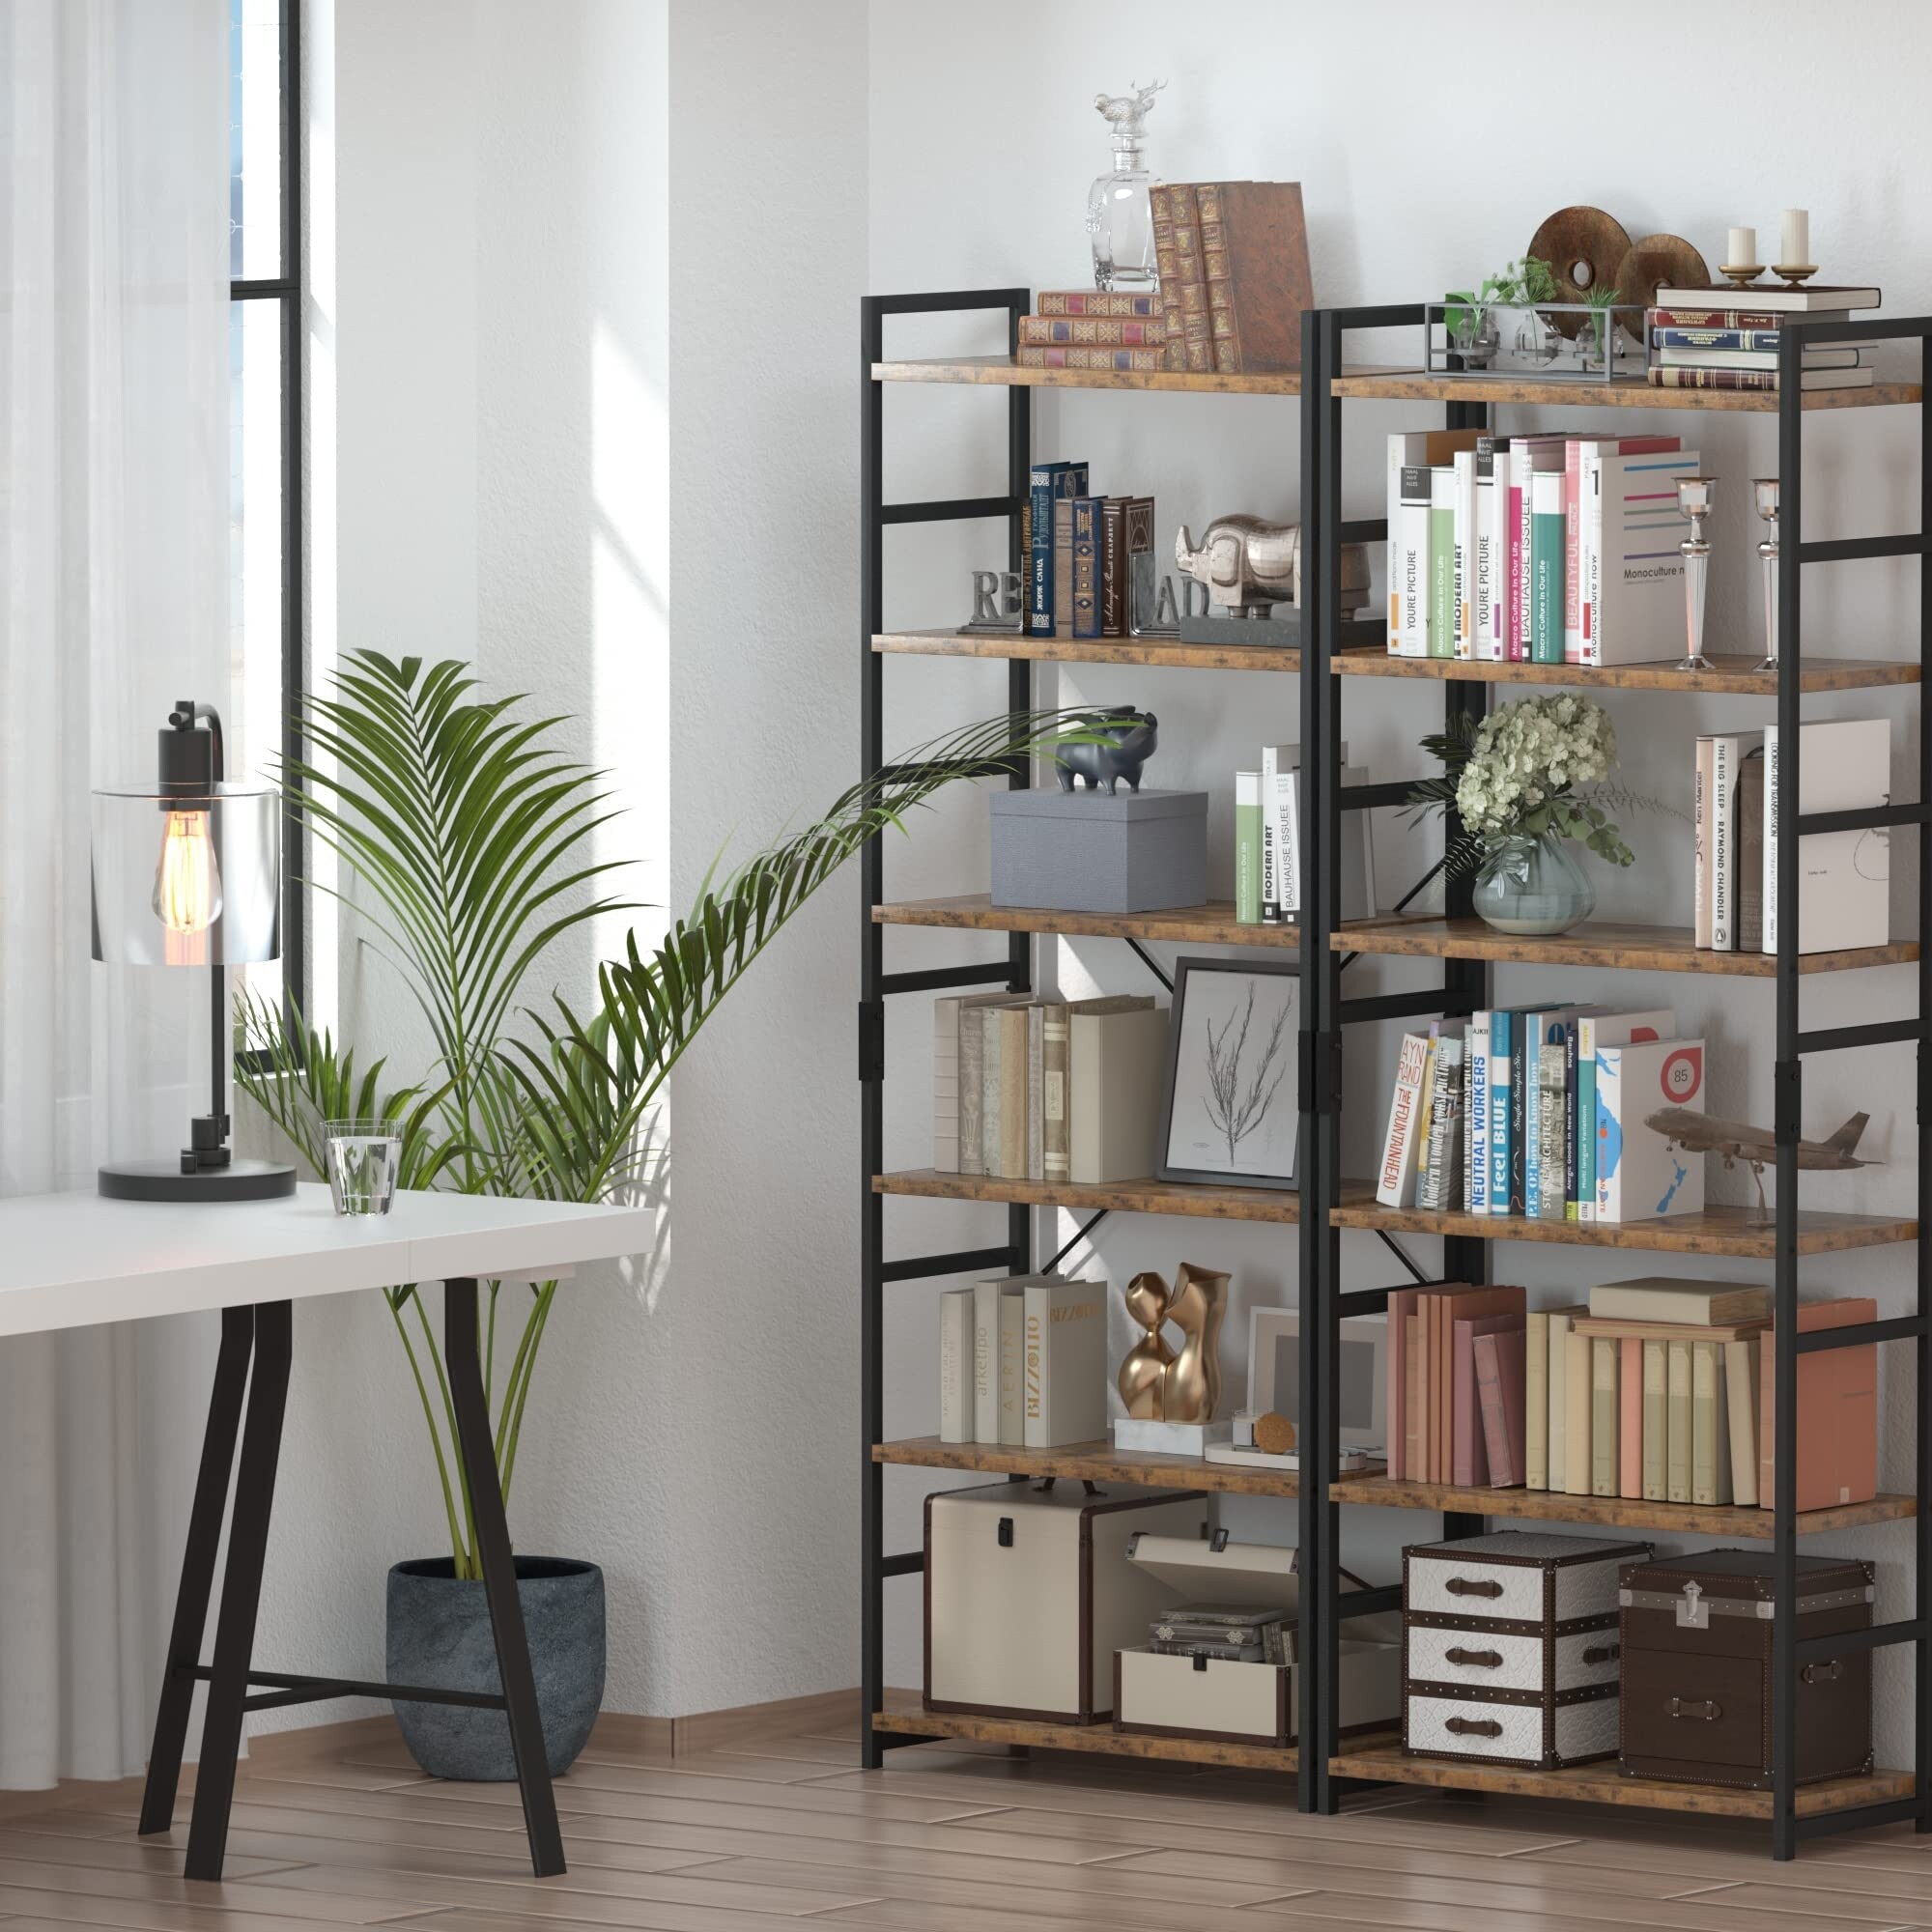 https://ak1.ostkcdn.com/images/products/is/images/direct/649d4dd721cc6f367964c41517154c8e2b1057fb/6-Tier-Bookshelf%2C-Tall-Bookcase-Shelf-Storage-Organizer%2C-Modern-Book-Shelf-for-Bedroom%2C-Living-Room-and-Home-Office%2C-Vintage.jpg